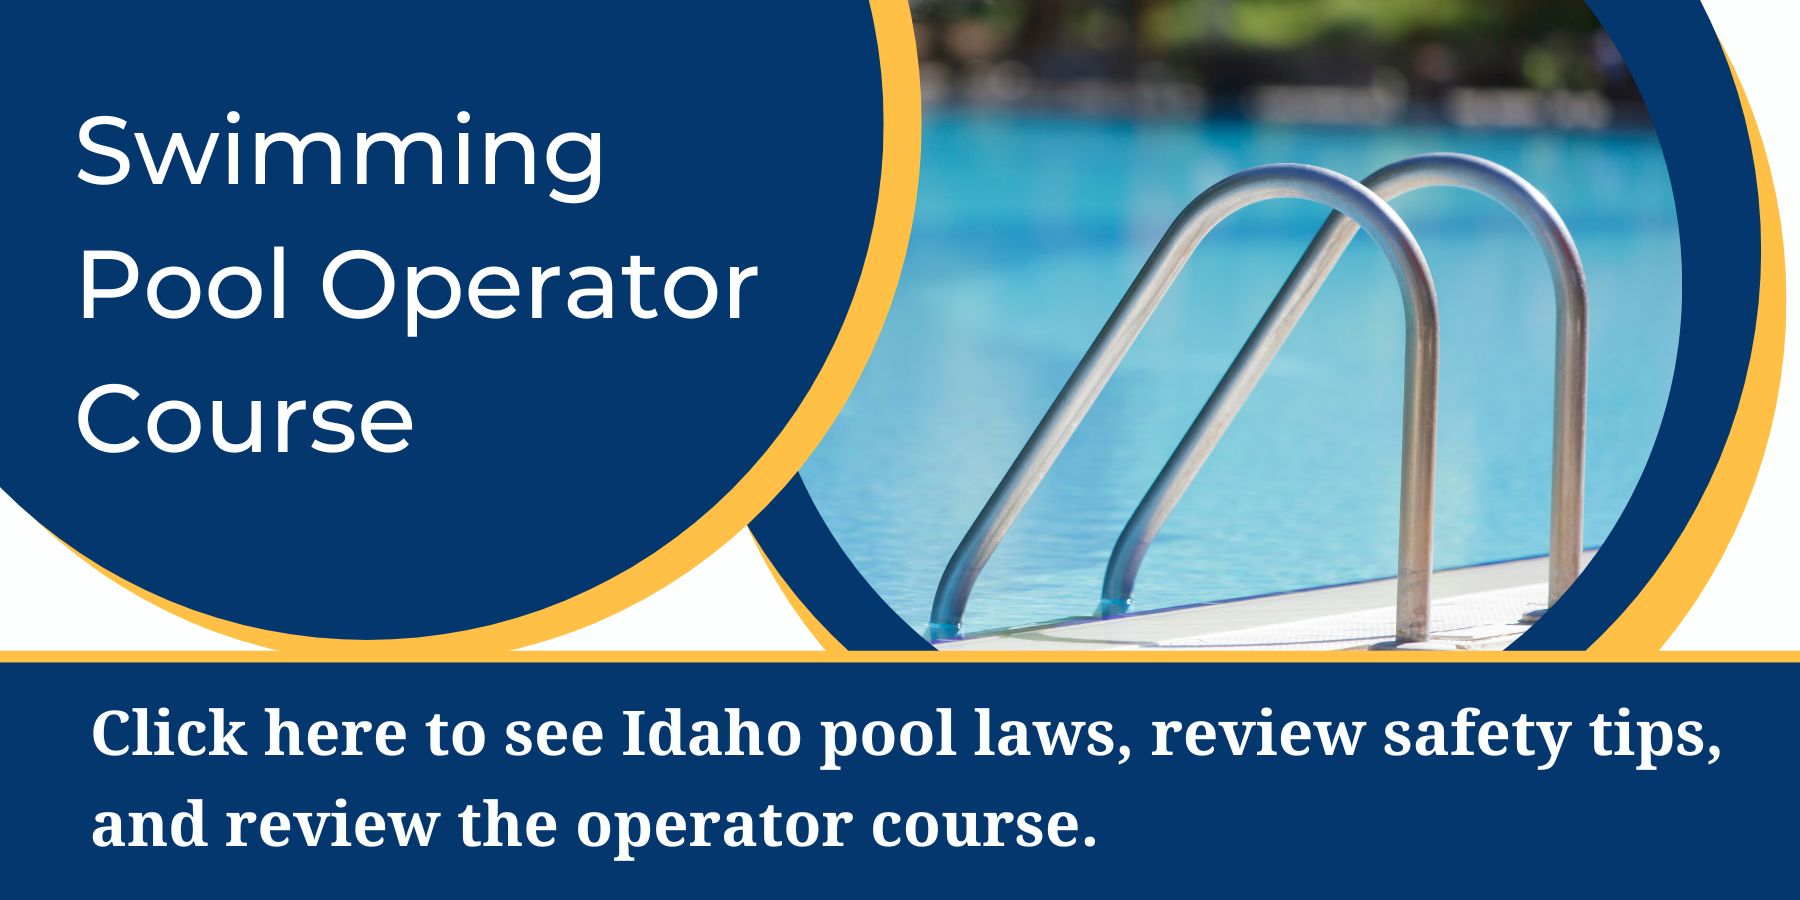 Link to pool operator course